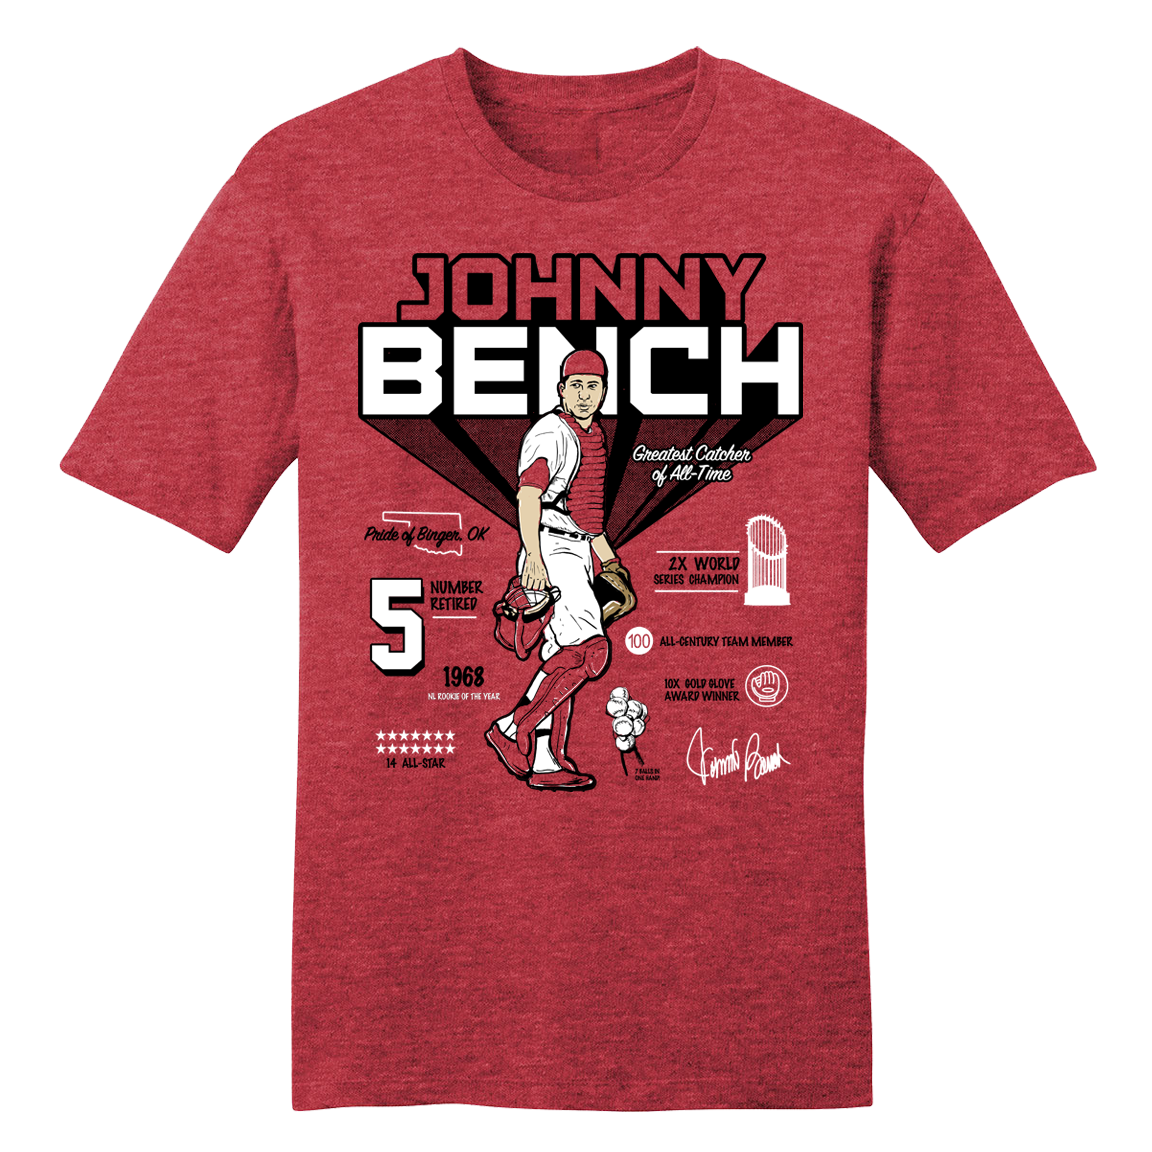 | Catcher Bench Greatest All-Time Cincy Shirts Johnny